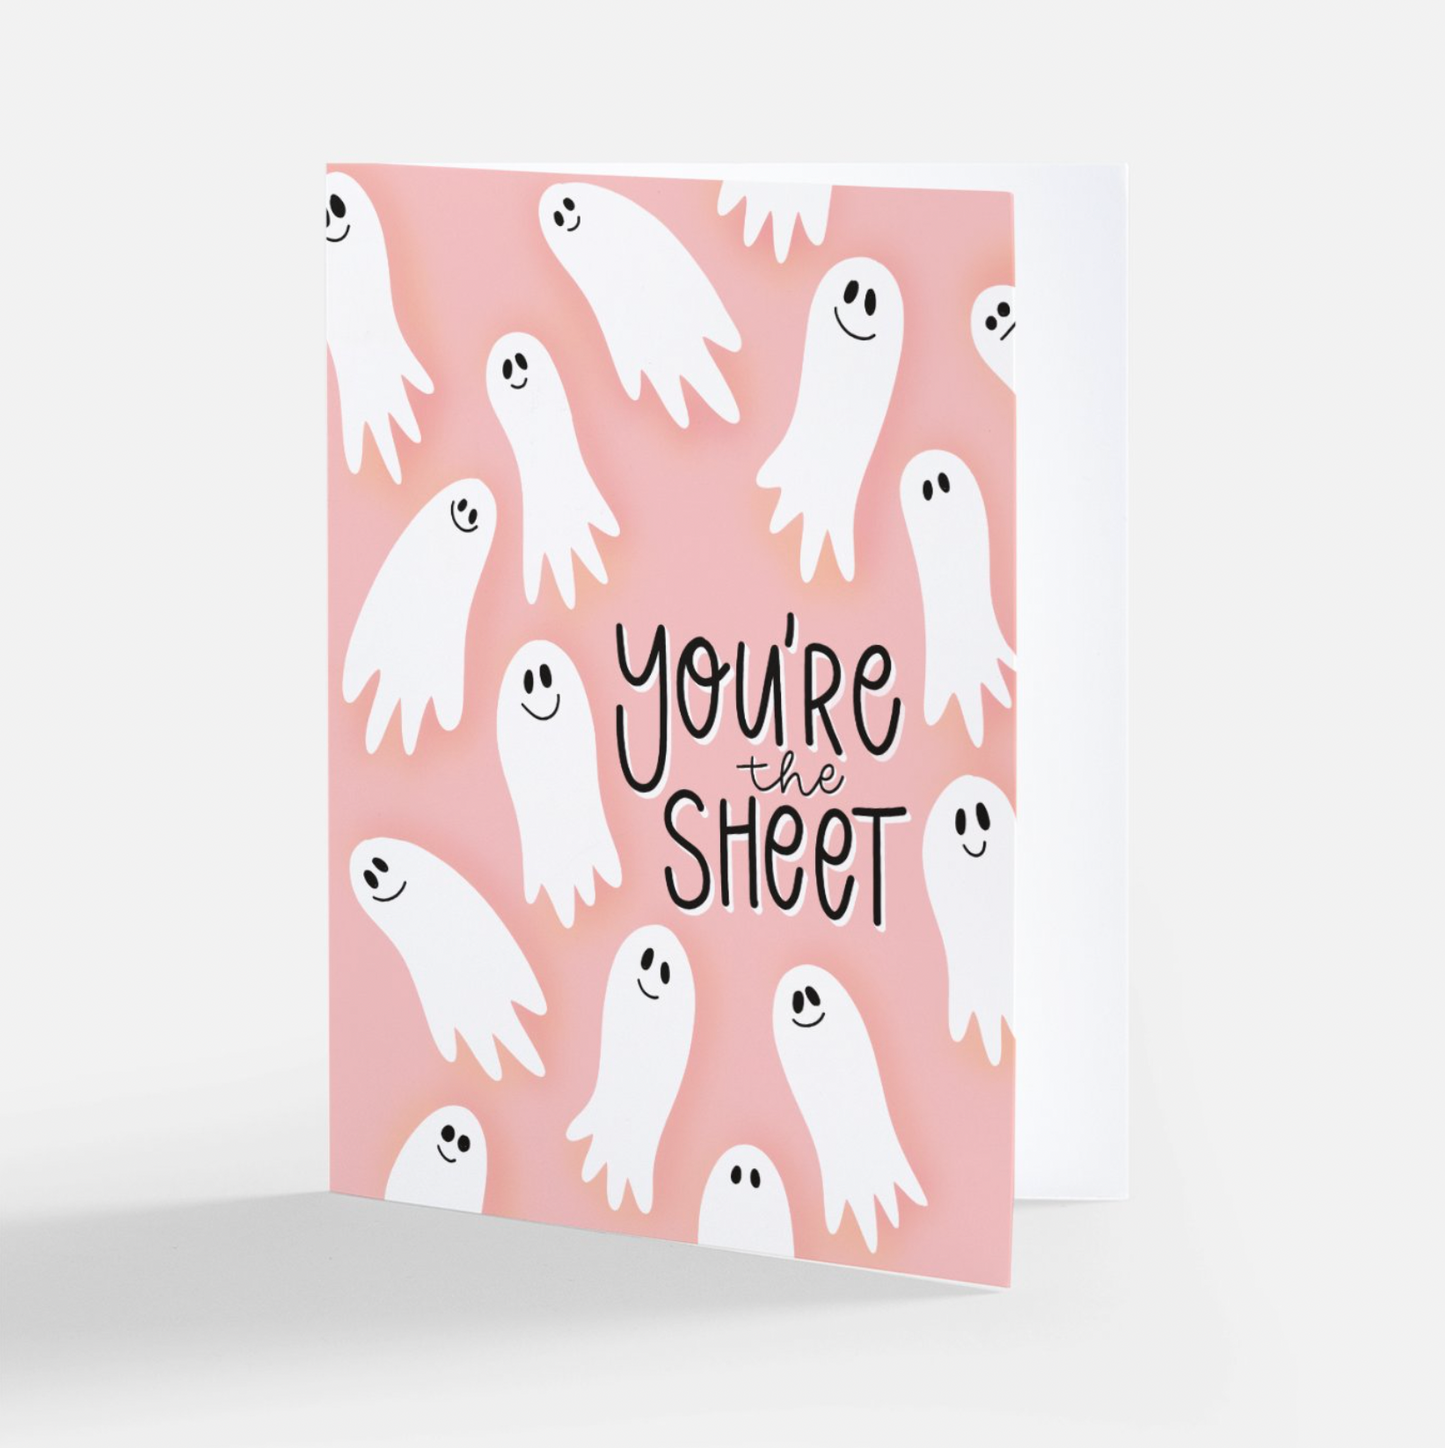 Halloween greeting card. snarky greeting card. Pun greeting card. Fall greeting card. You're the sheet. Floating ghosts. smile faces. Pink note card. Friendship card. Spooky season greeting card. a2 size. envelope included. Made by Katie Belle Co. 